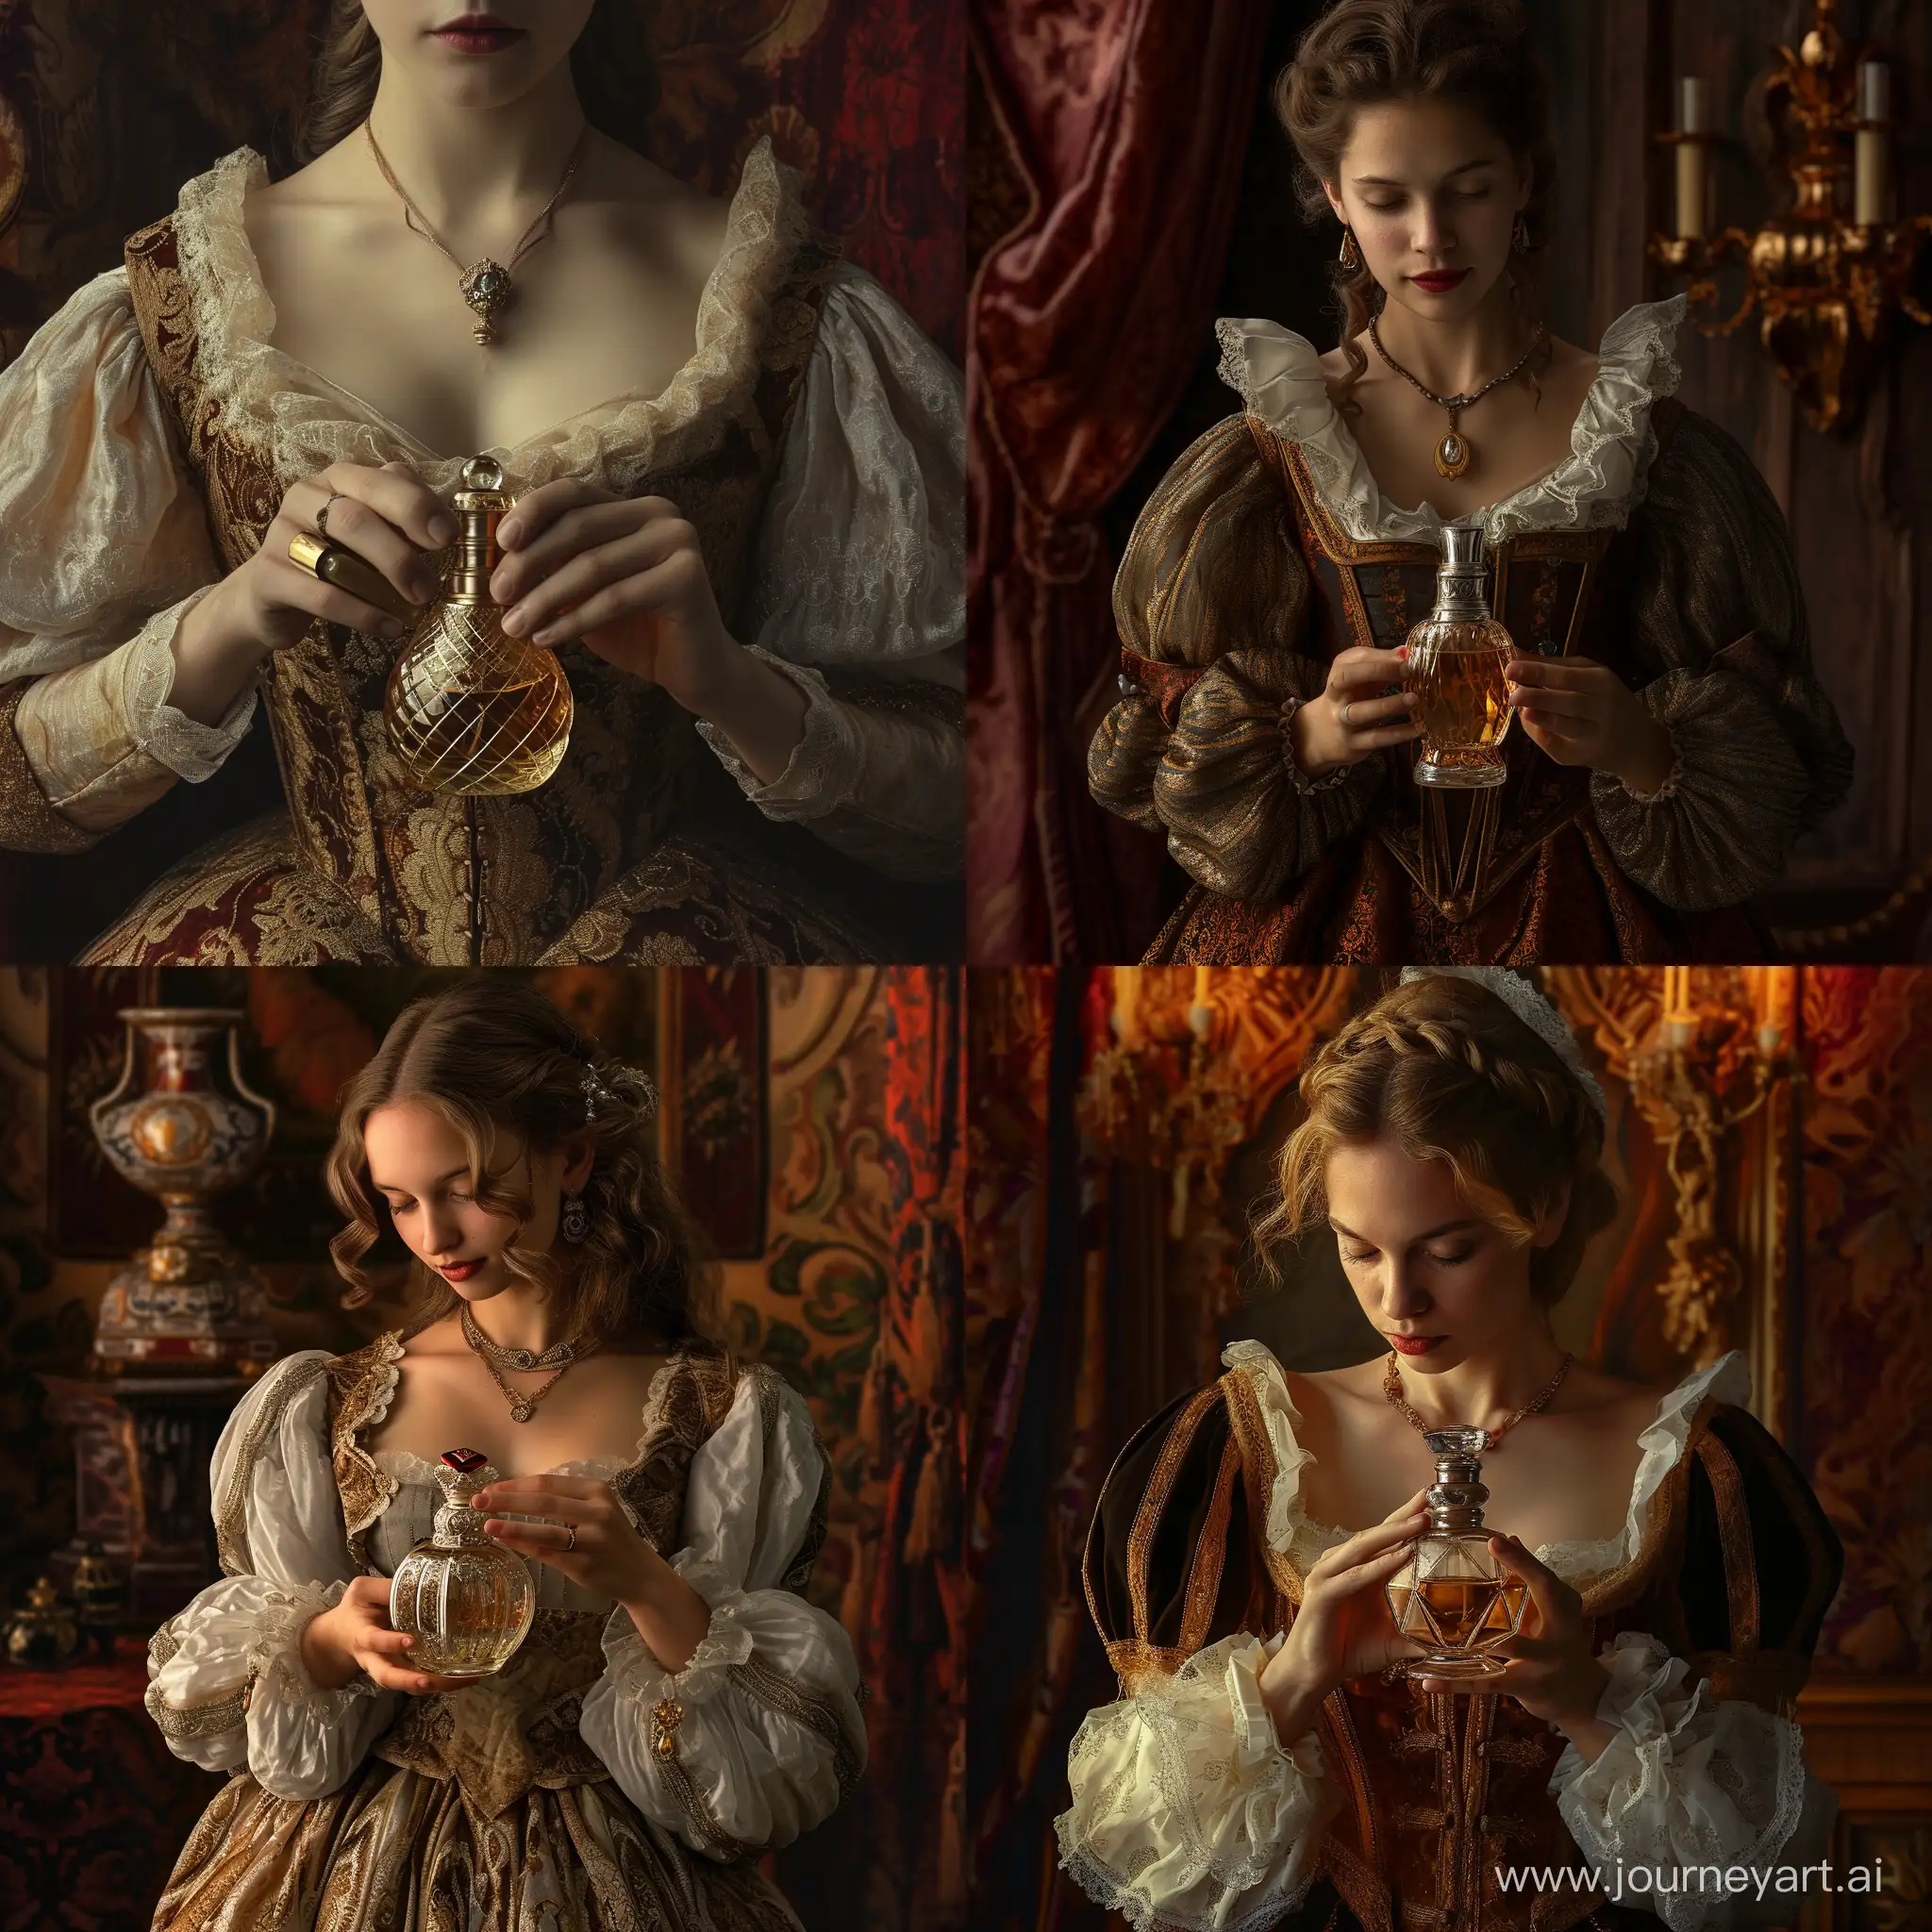 woman, 16th century, France, rich courtesan, clothes, detailed, realistic, atmospheric, that century, that history, magnificent background, holding an exquisite bottle of perfume in her hands